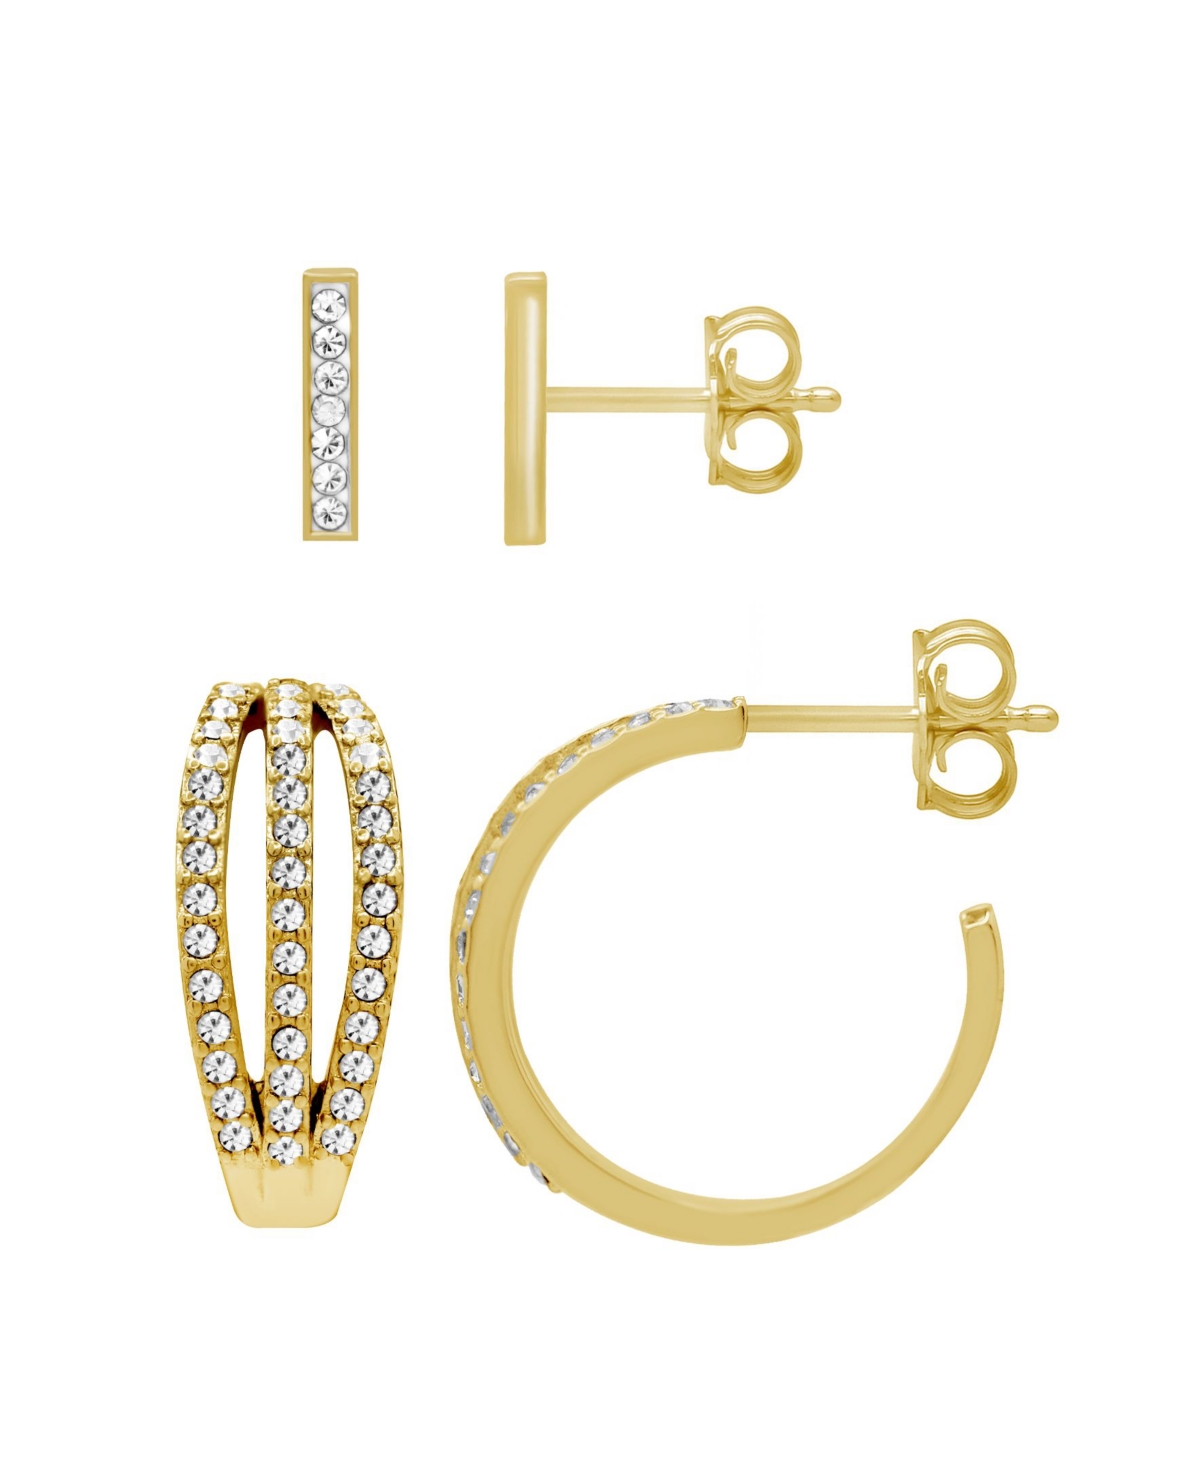 Gold Plated 2-Piece C Hoop Bar Earrings Set - Gold-Plated